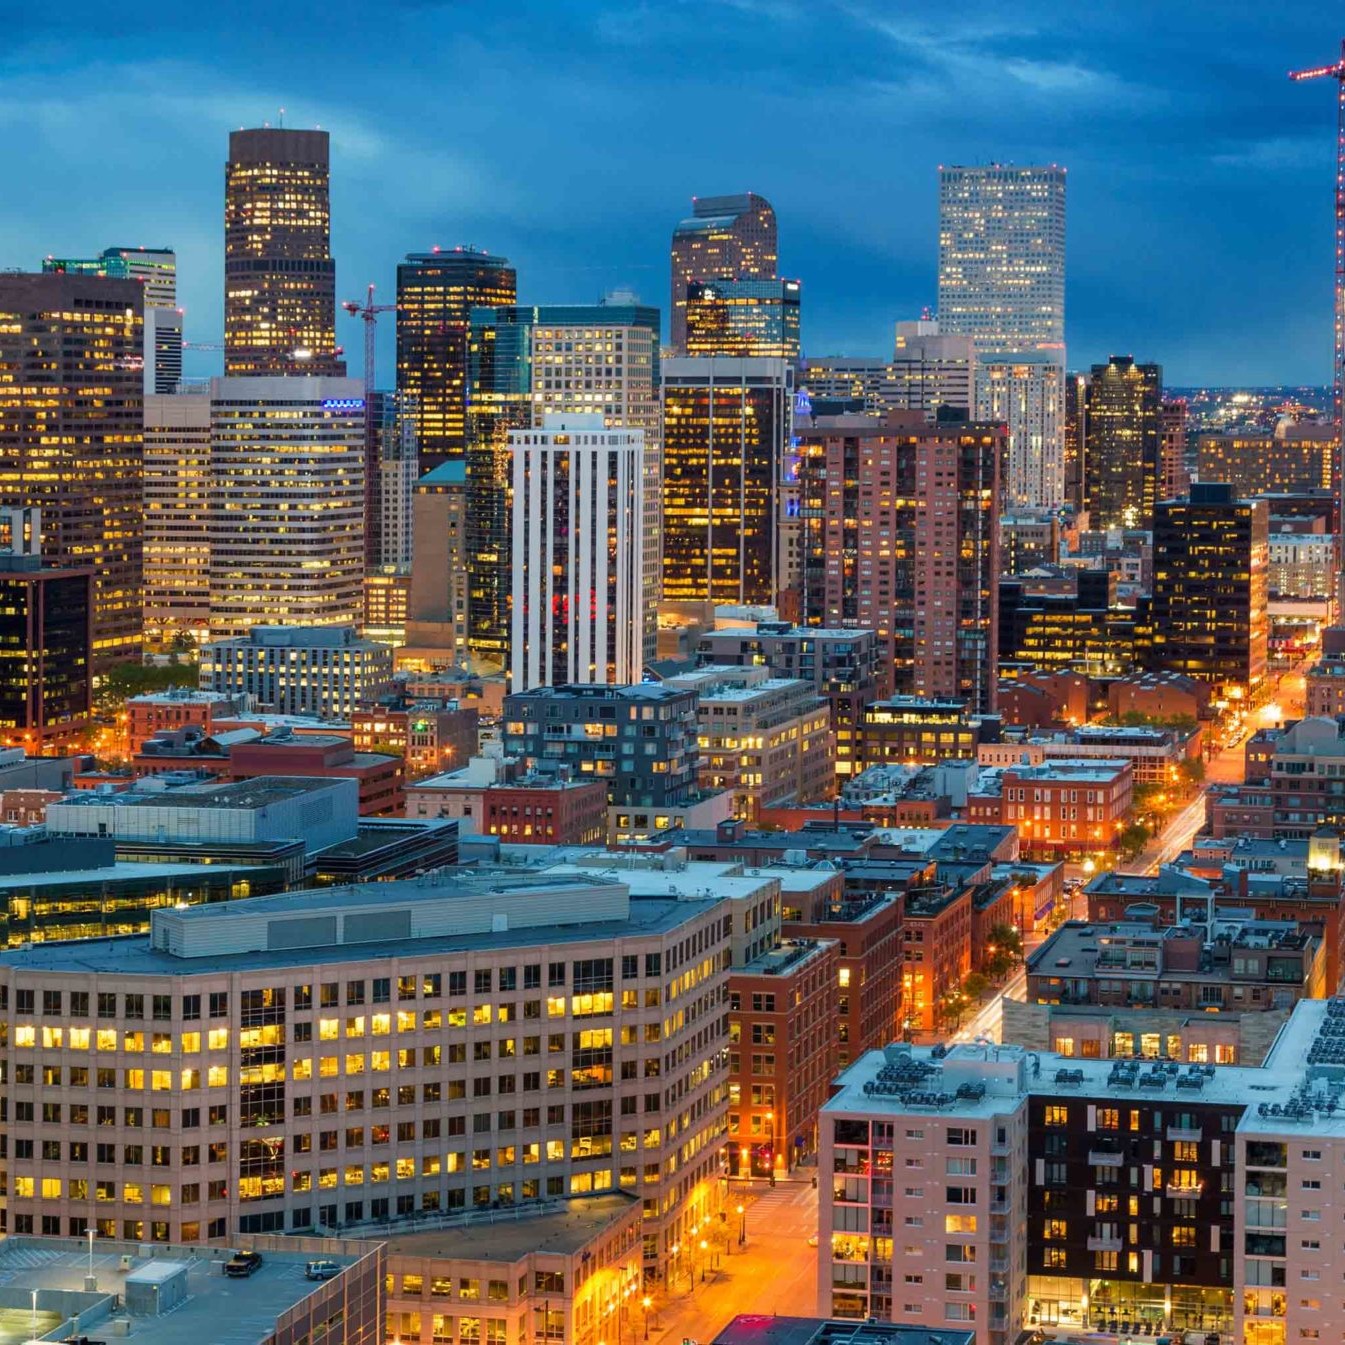 The cityscape of Denver, one of the most successful comeback cities.